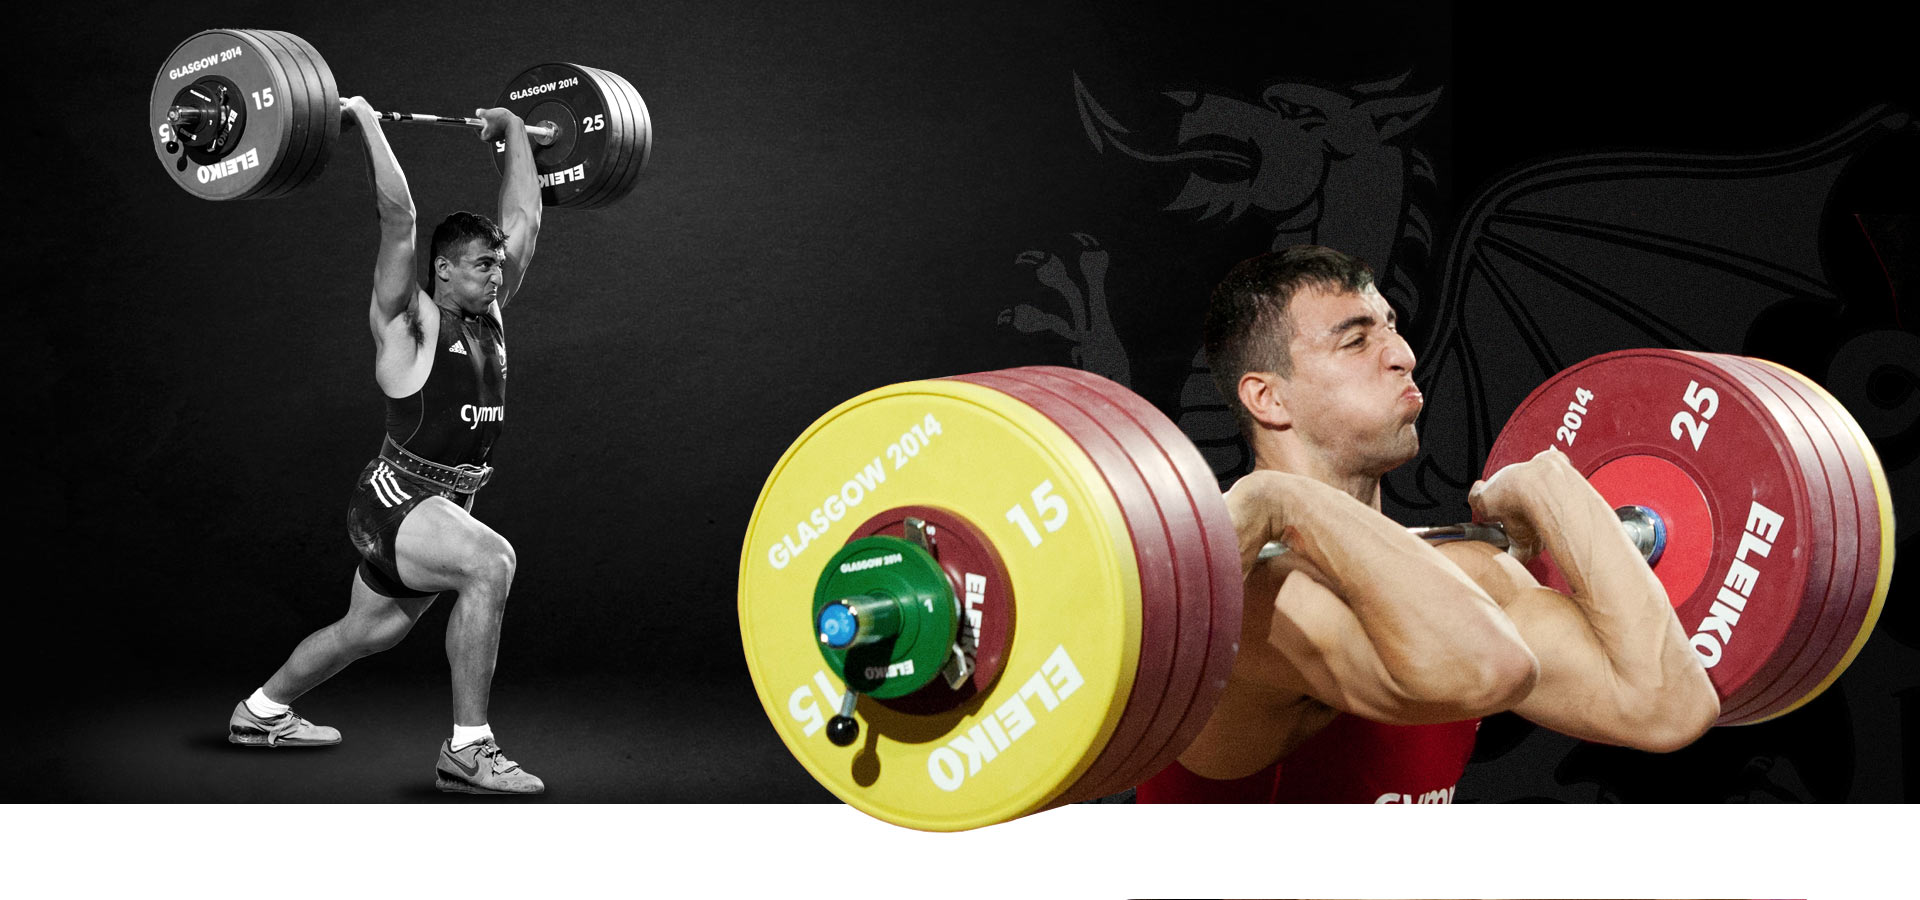 Images of Weightlifting | 1920x900